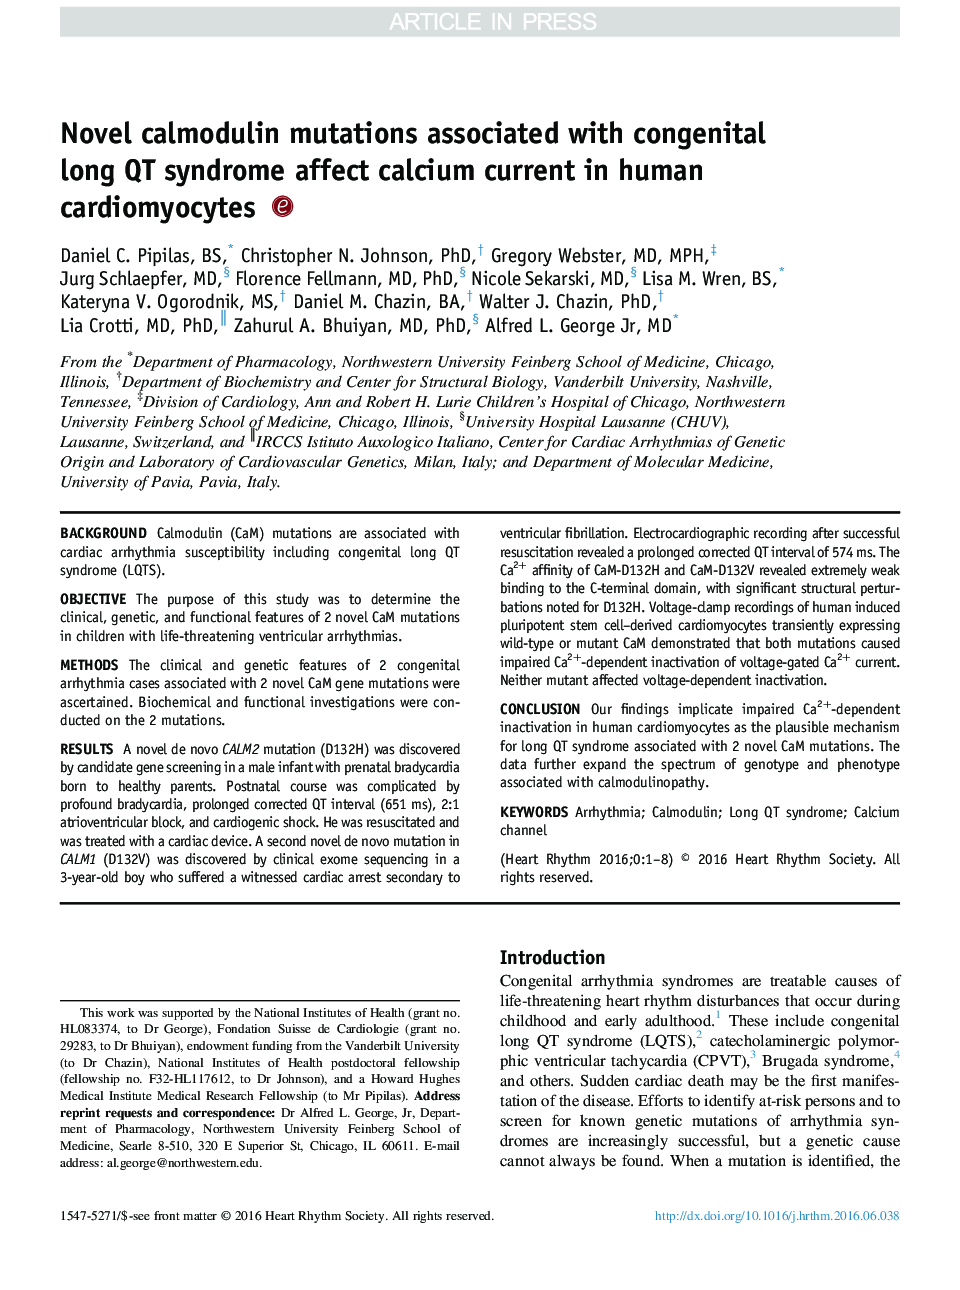 Novel calmodulin mutations associated with congenital long QT syndrome affect calcium current in human cardiomyocytes